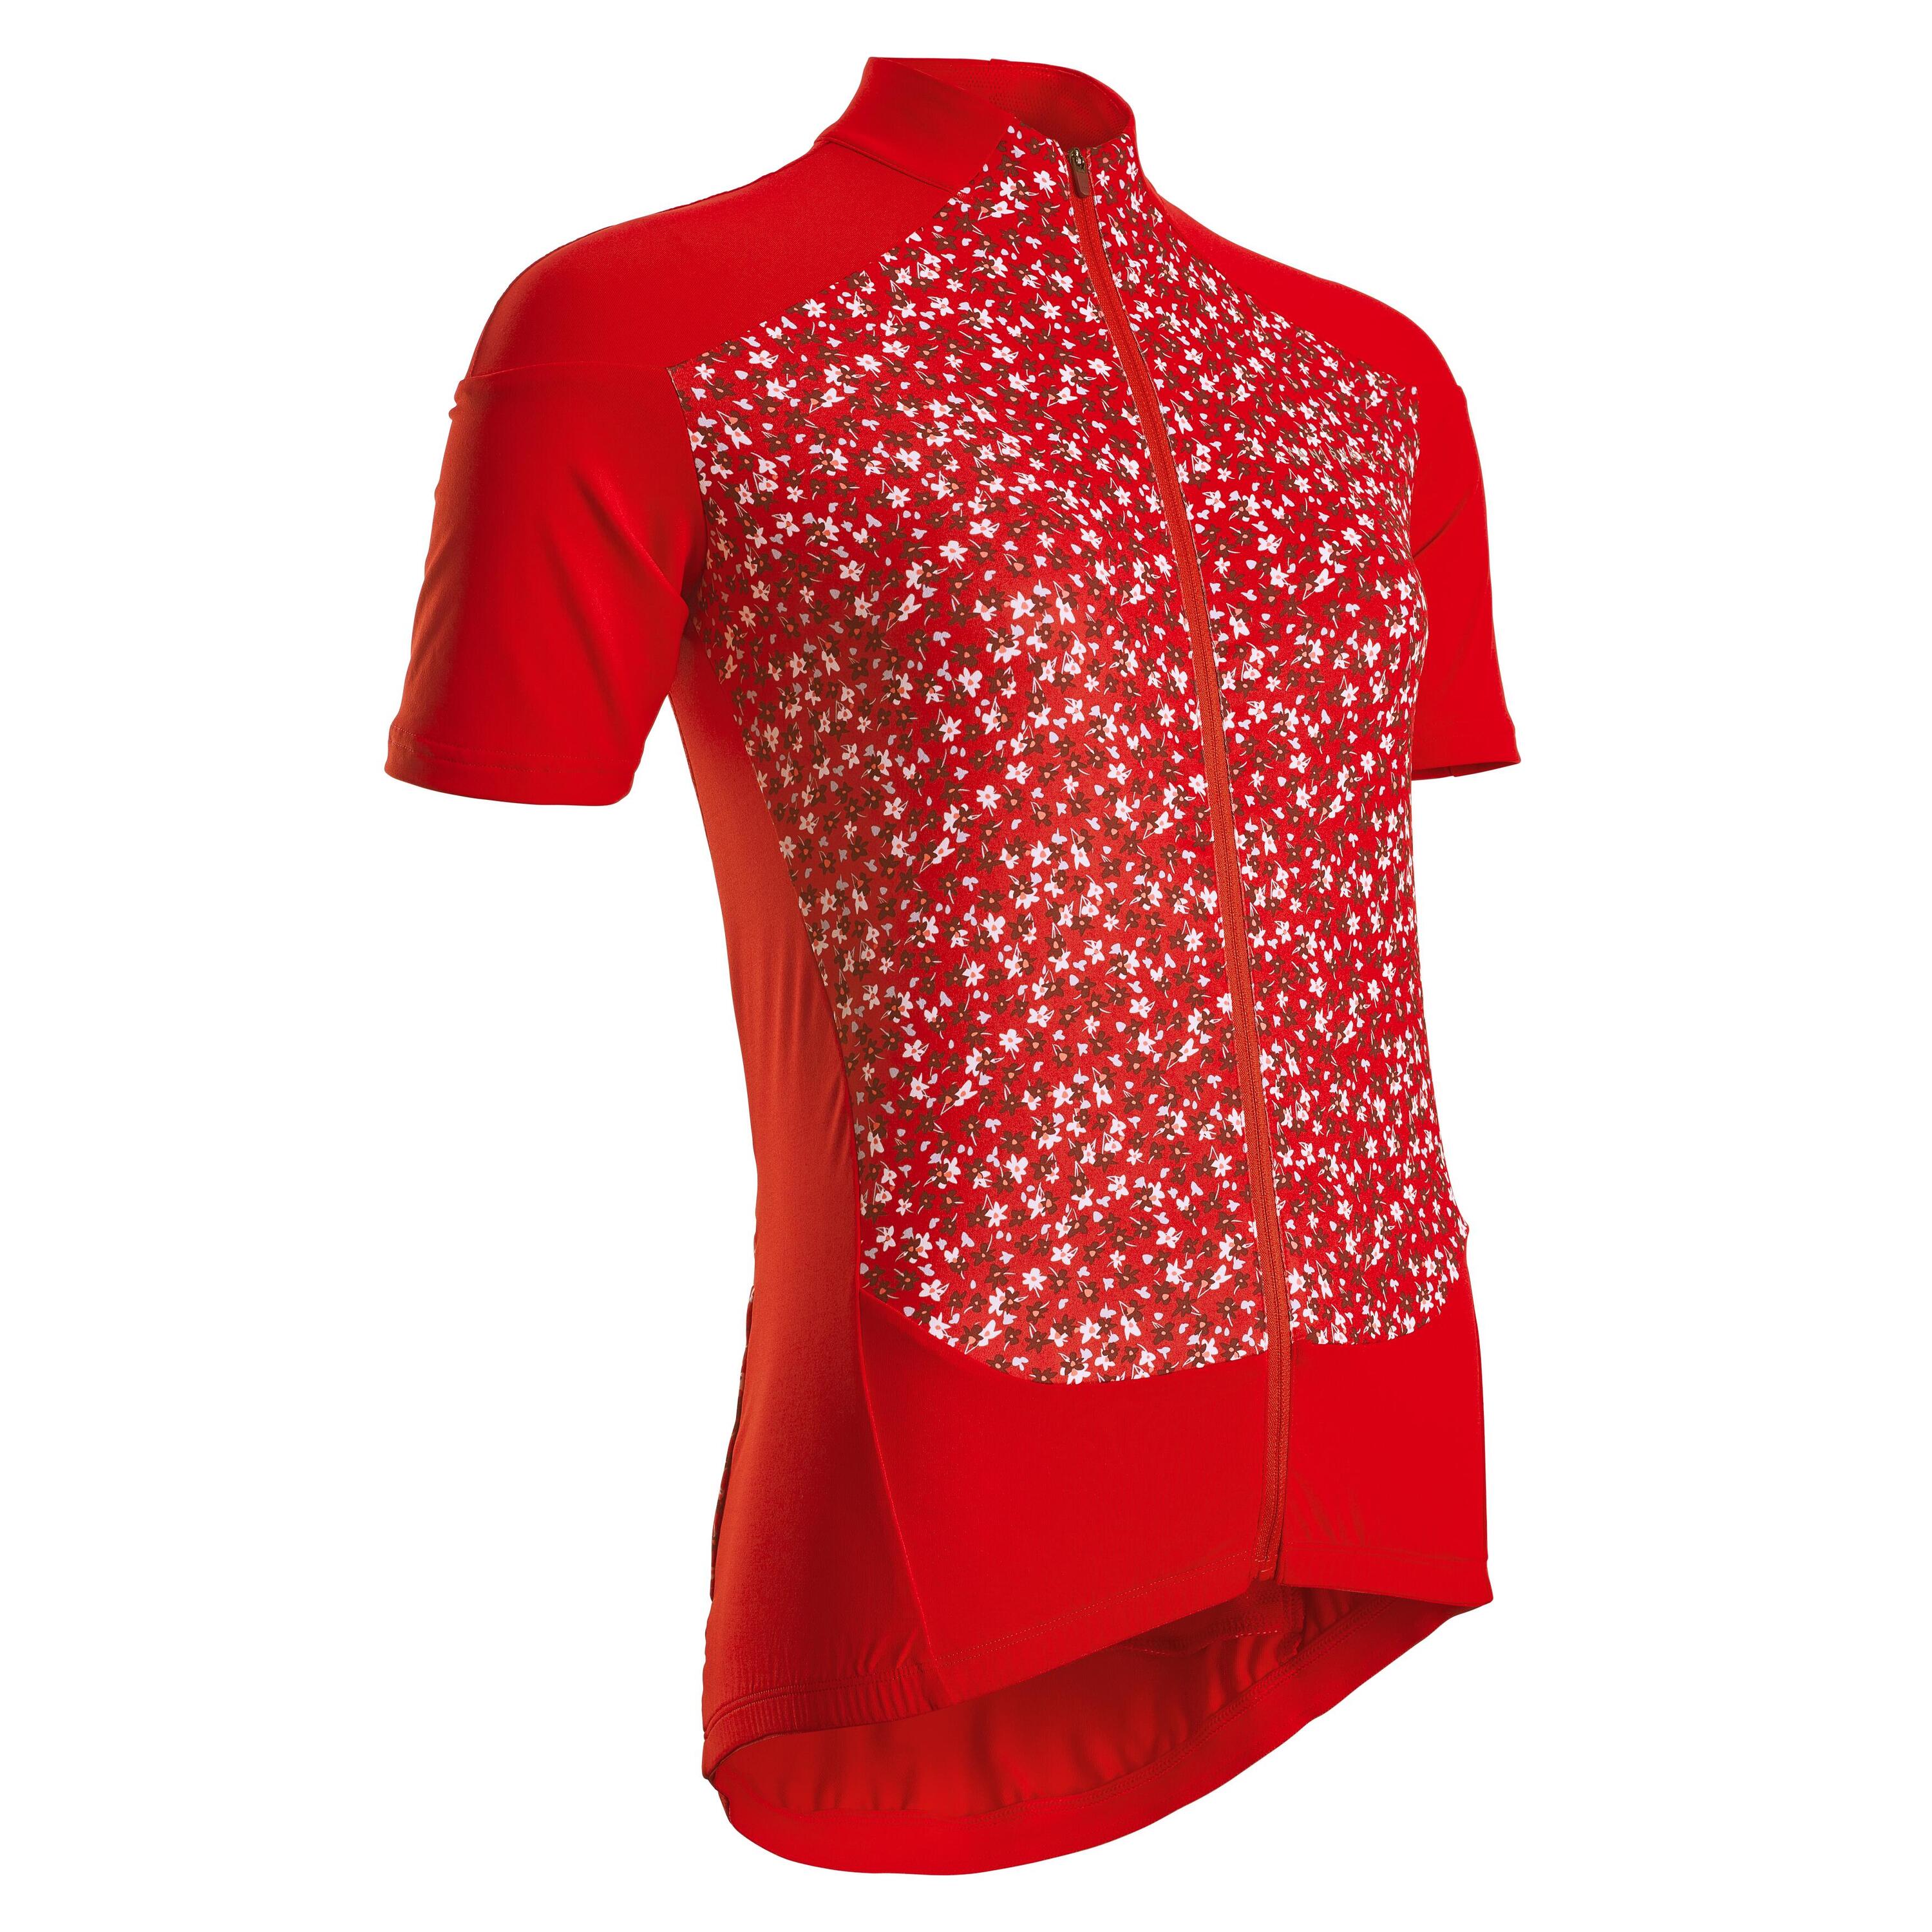 VAN RYSEL Women's Short-Sleeved Road Cycling Jersey RC500 - Floral/Red